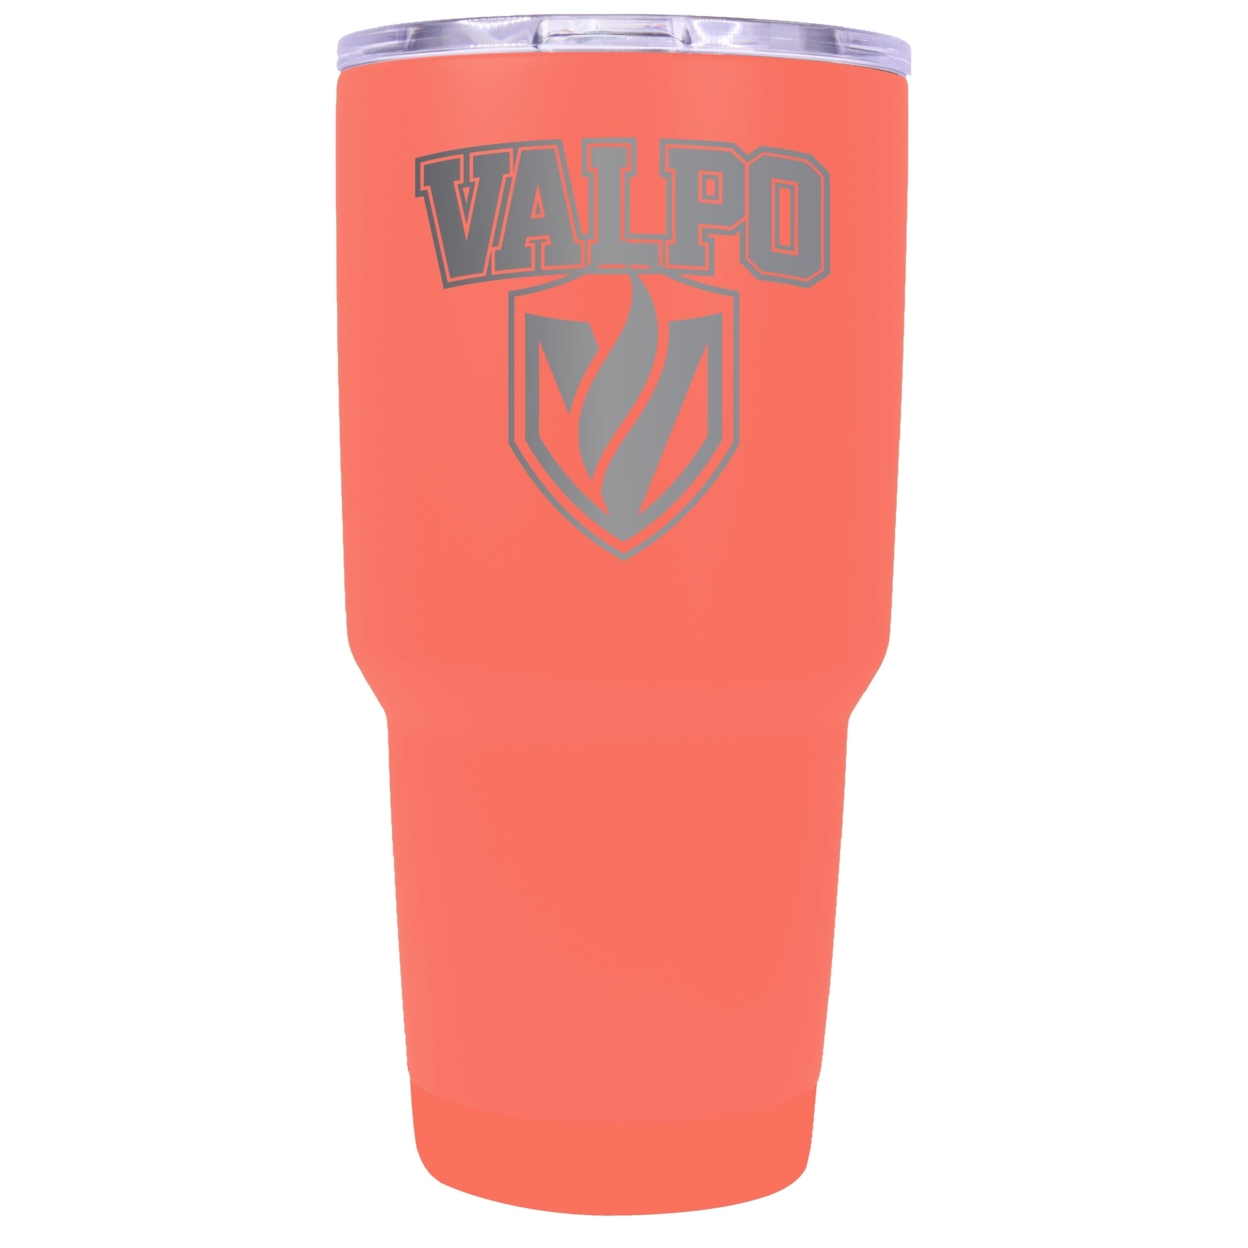 Valparaiso University 24 Oz Laser Engraved Stainless Steel Insulated Tumbler - Choose Your Color. - Coral